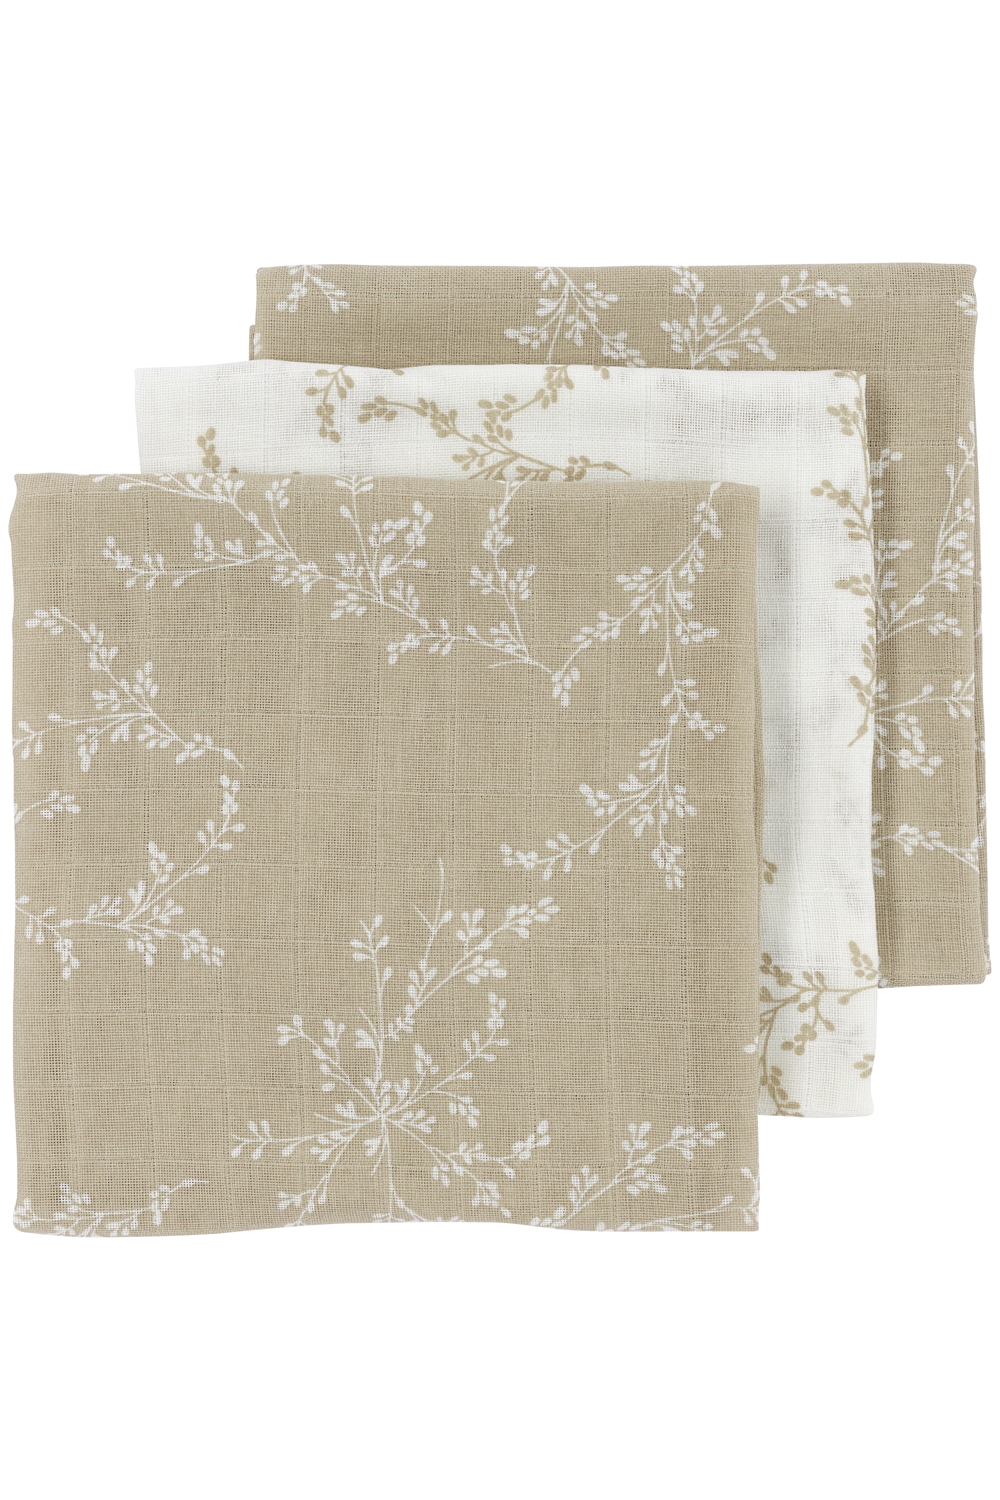 Hydrofiele Luiers 3-pack Branches - Sand - 70x70cm